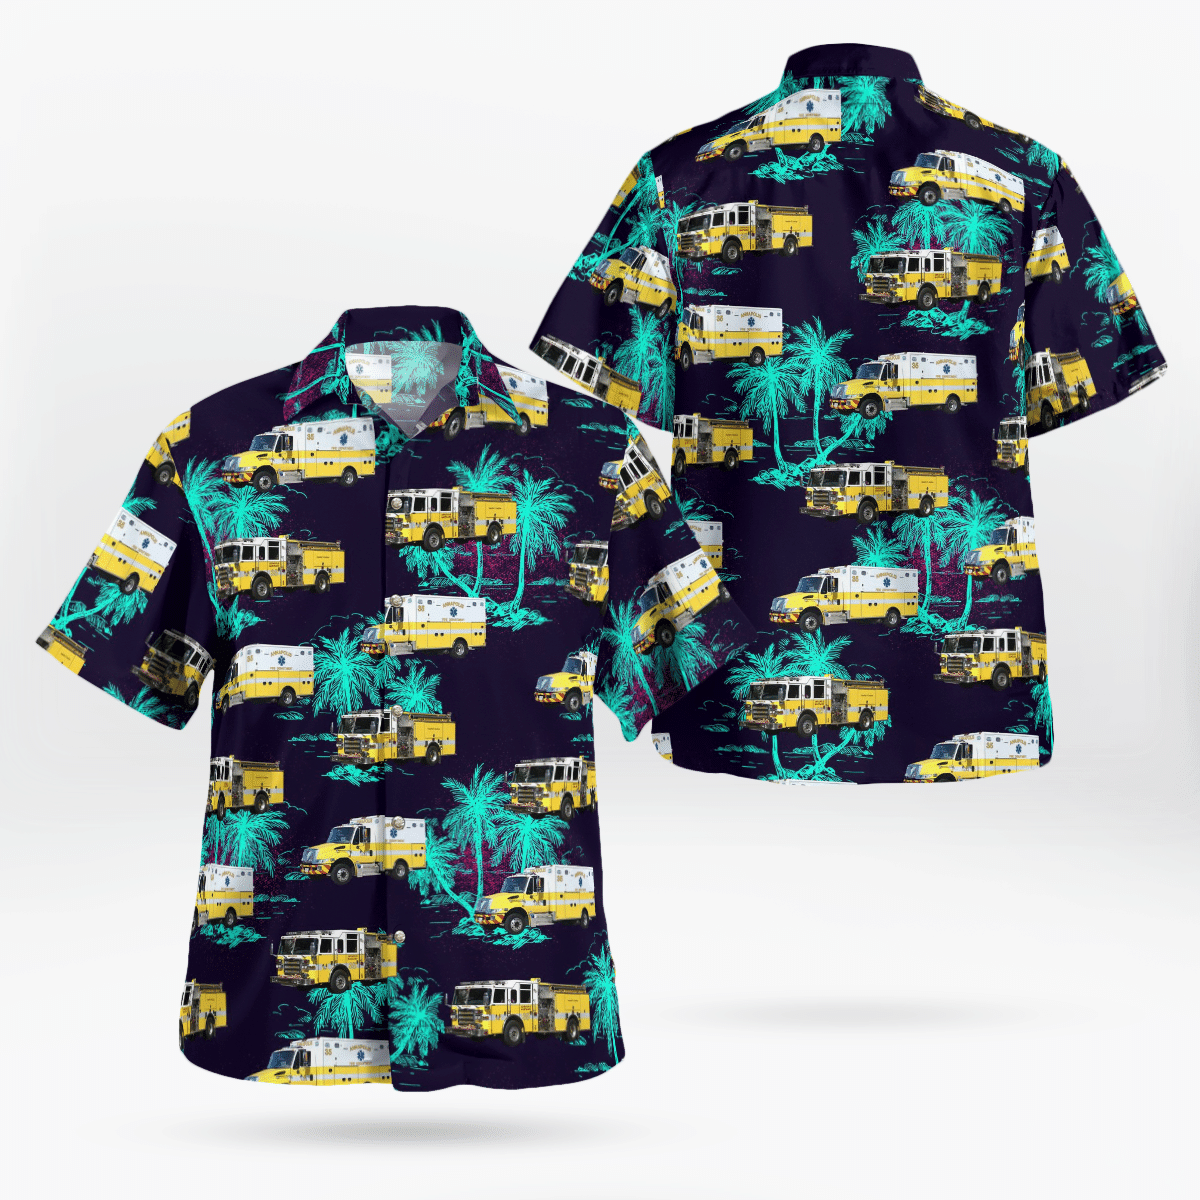 Shop now to find the perfect Hawaii Shirt for your hobby 22